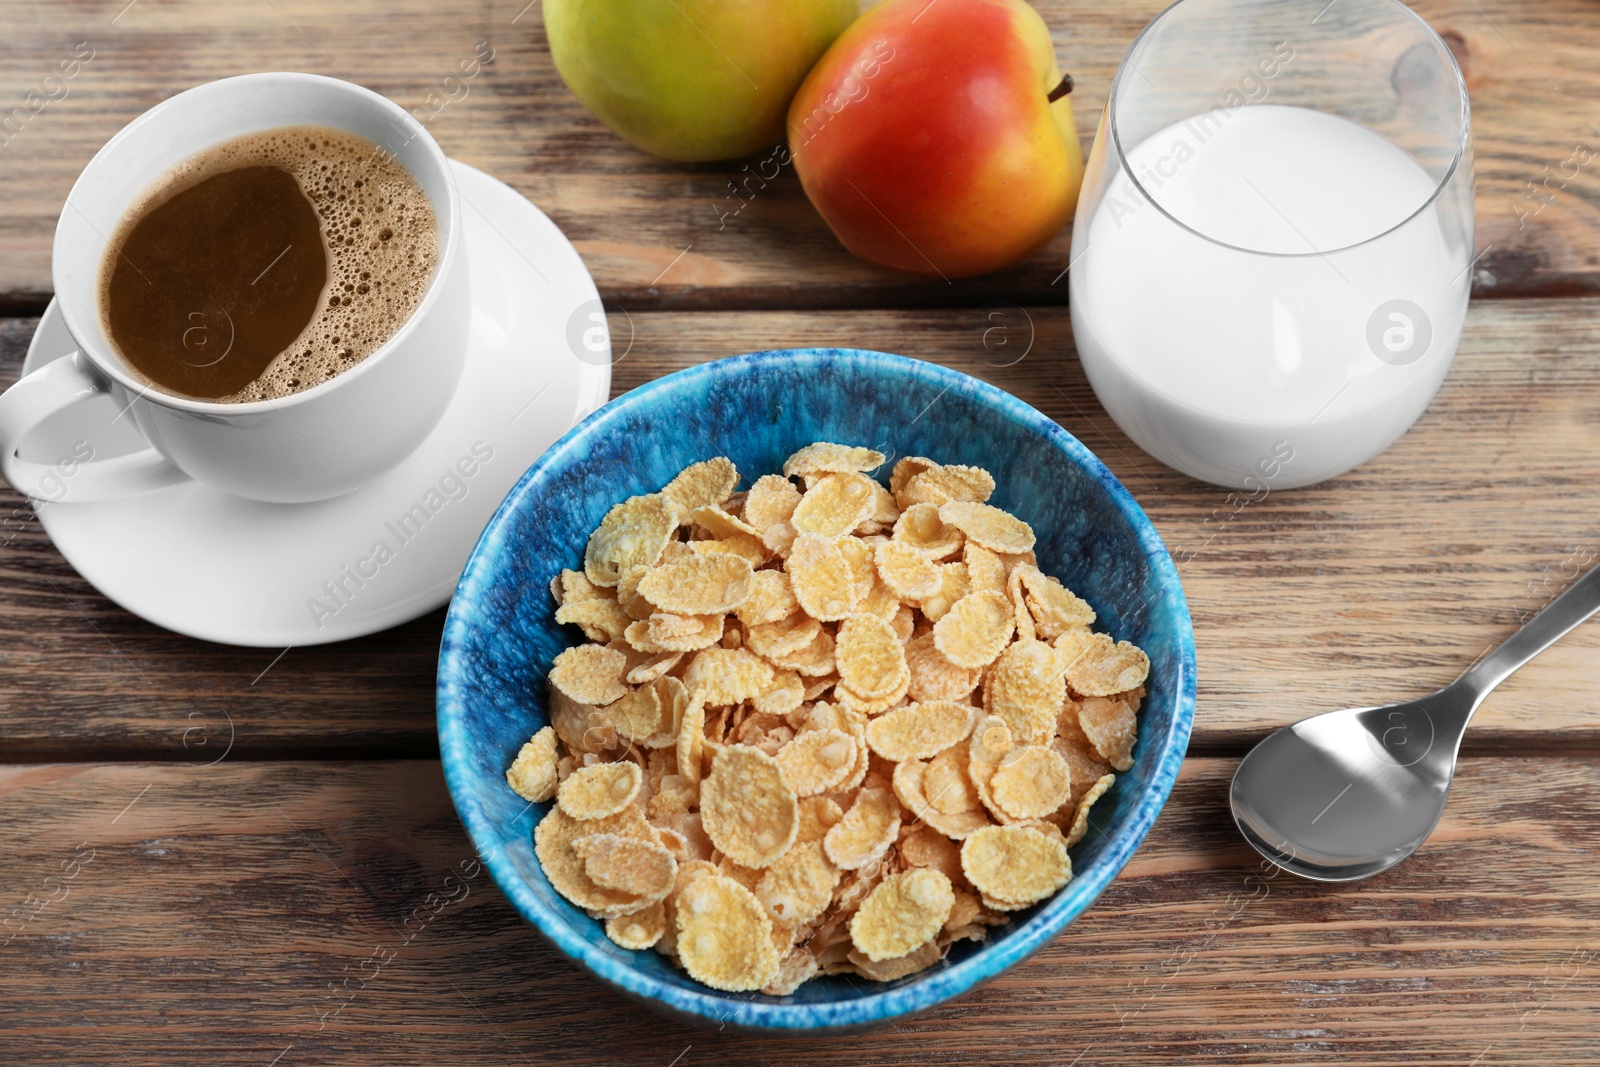 Photo of Bowl with healthy cornflakes for breakfast served on wooden table